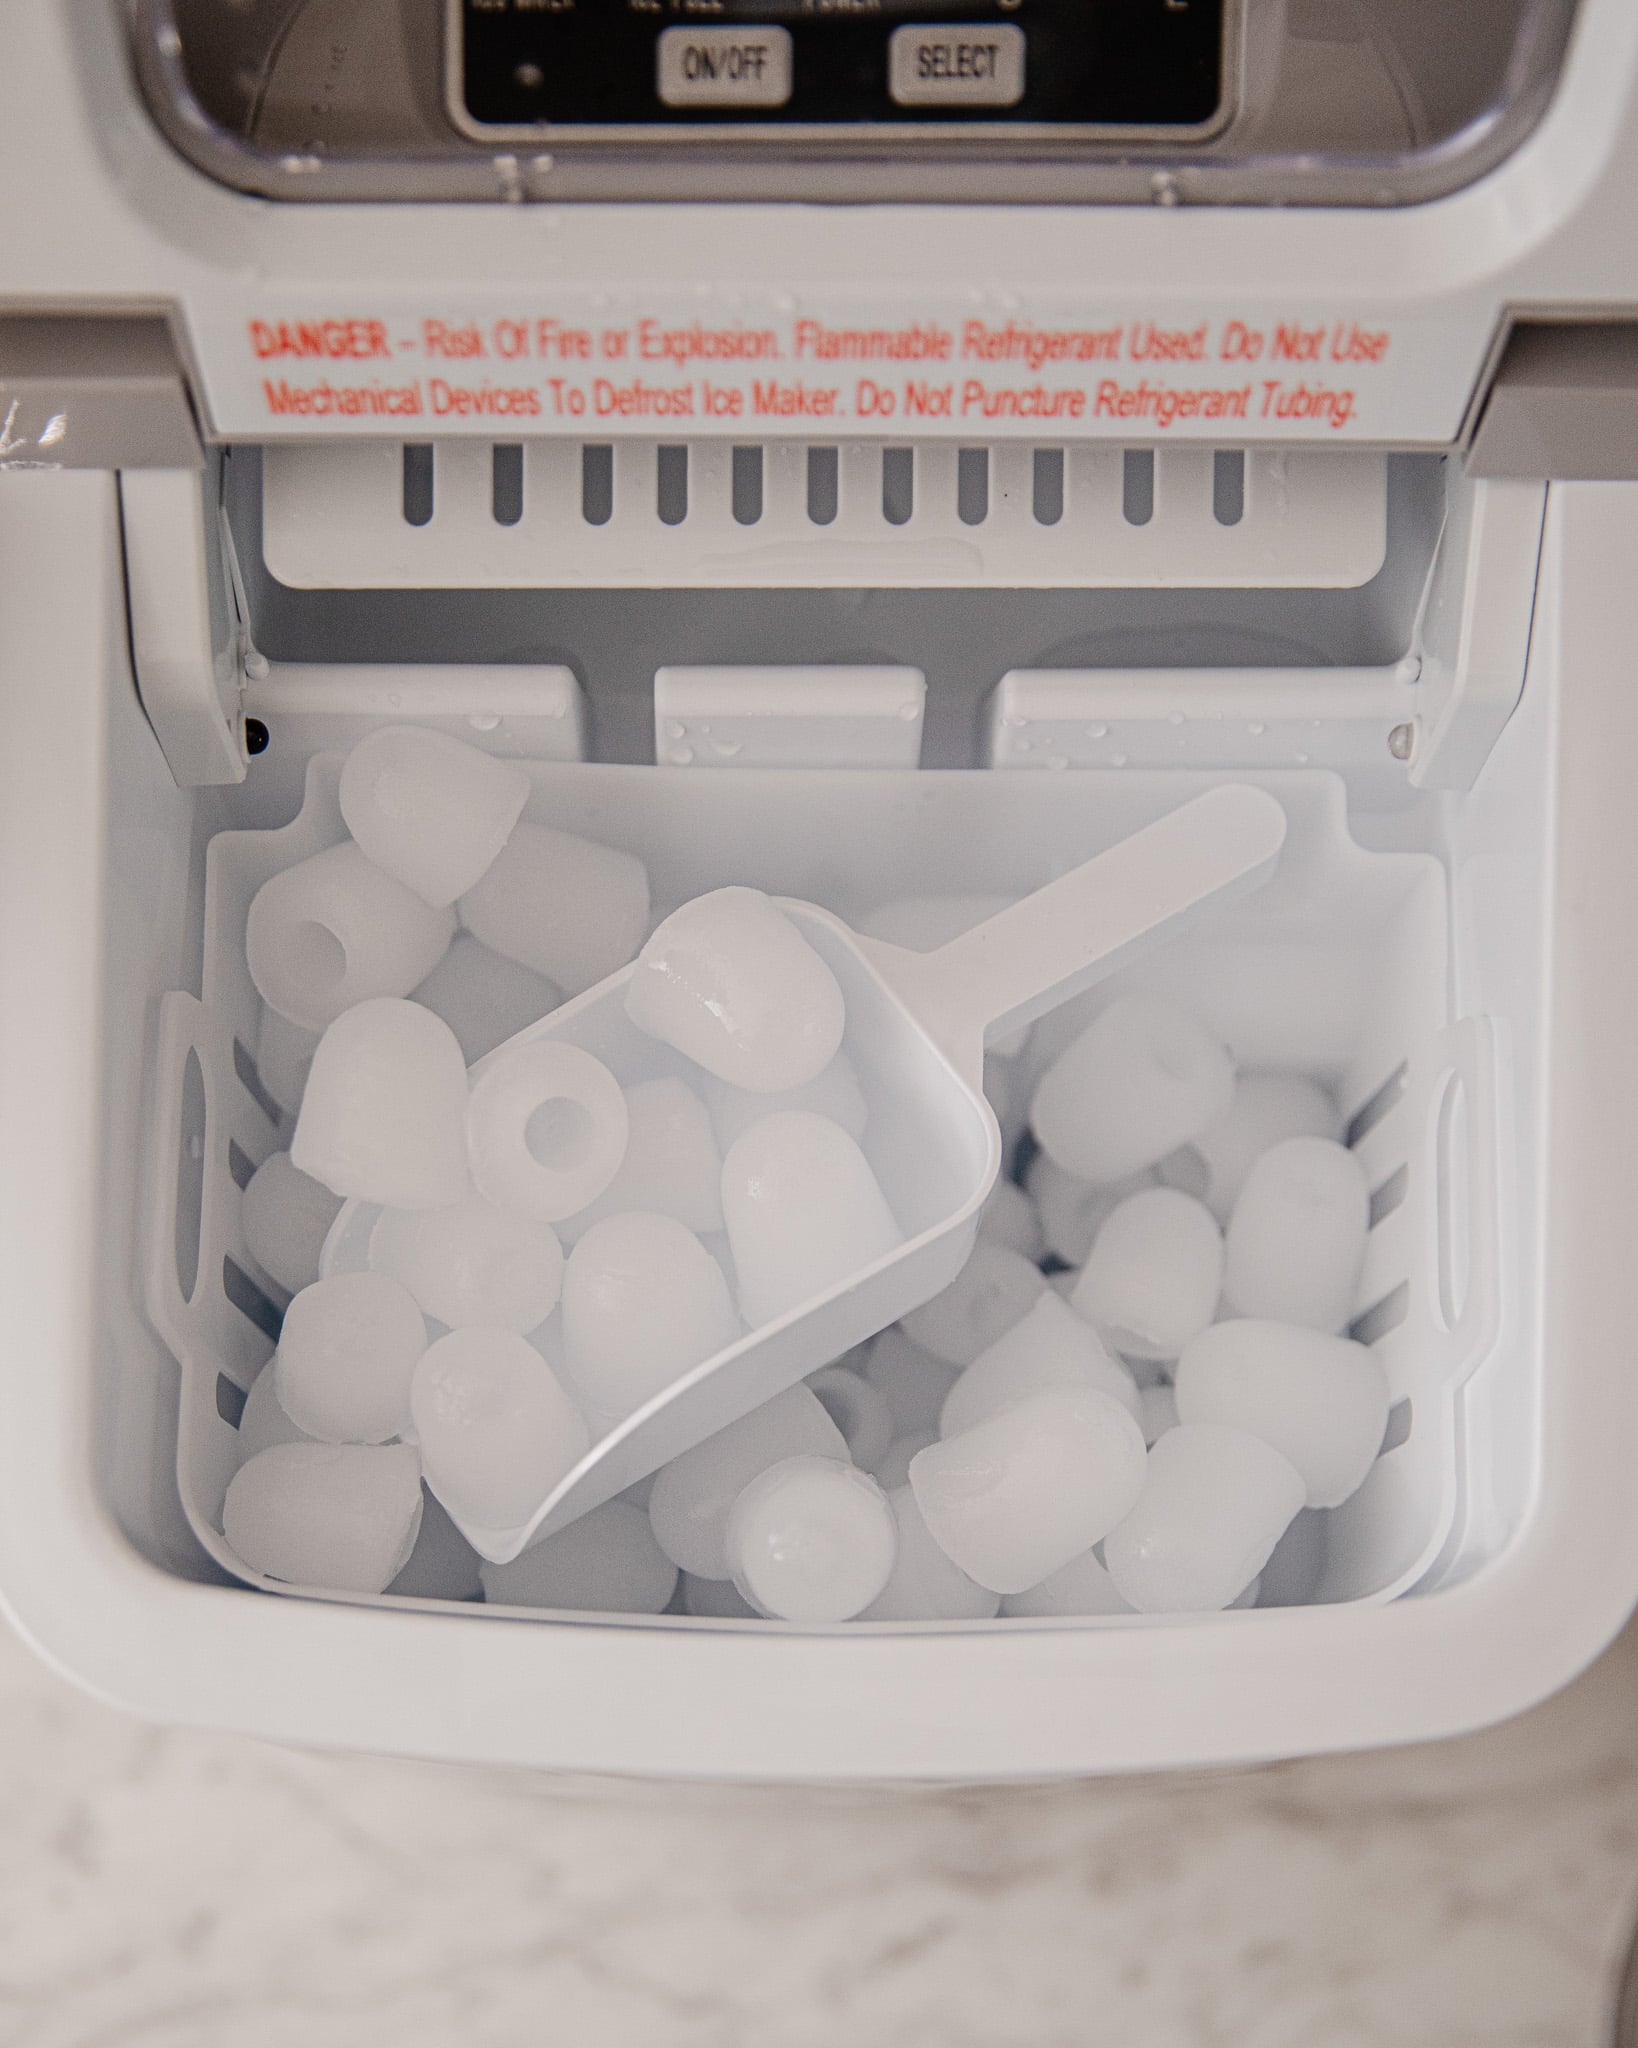 Orgo Ice Maker Review - Crunchy Sonic Ice at Home!